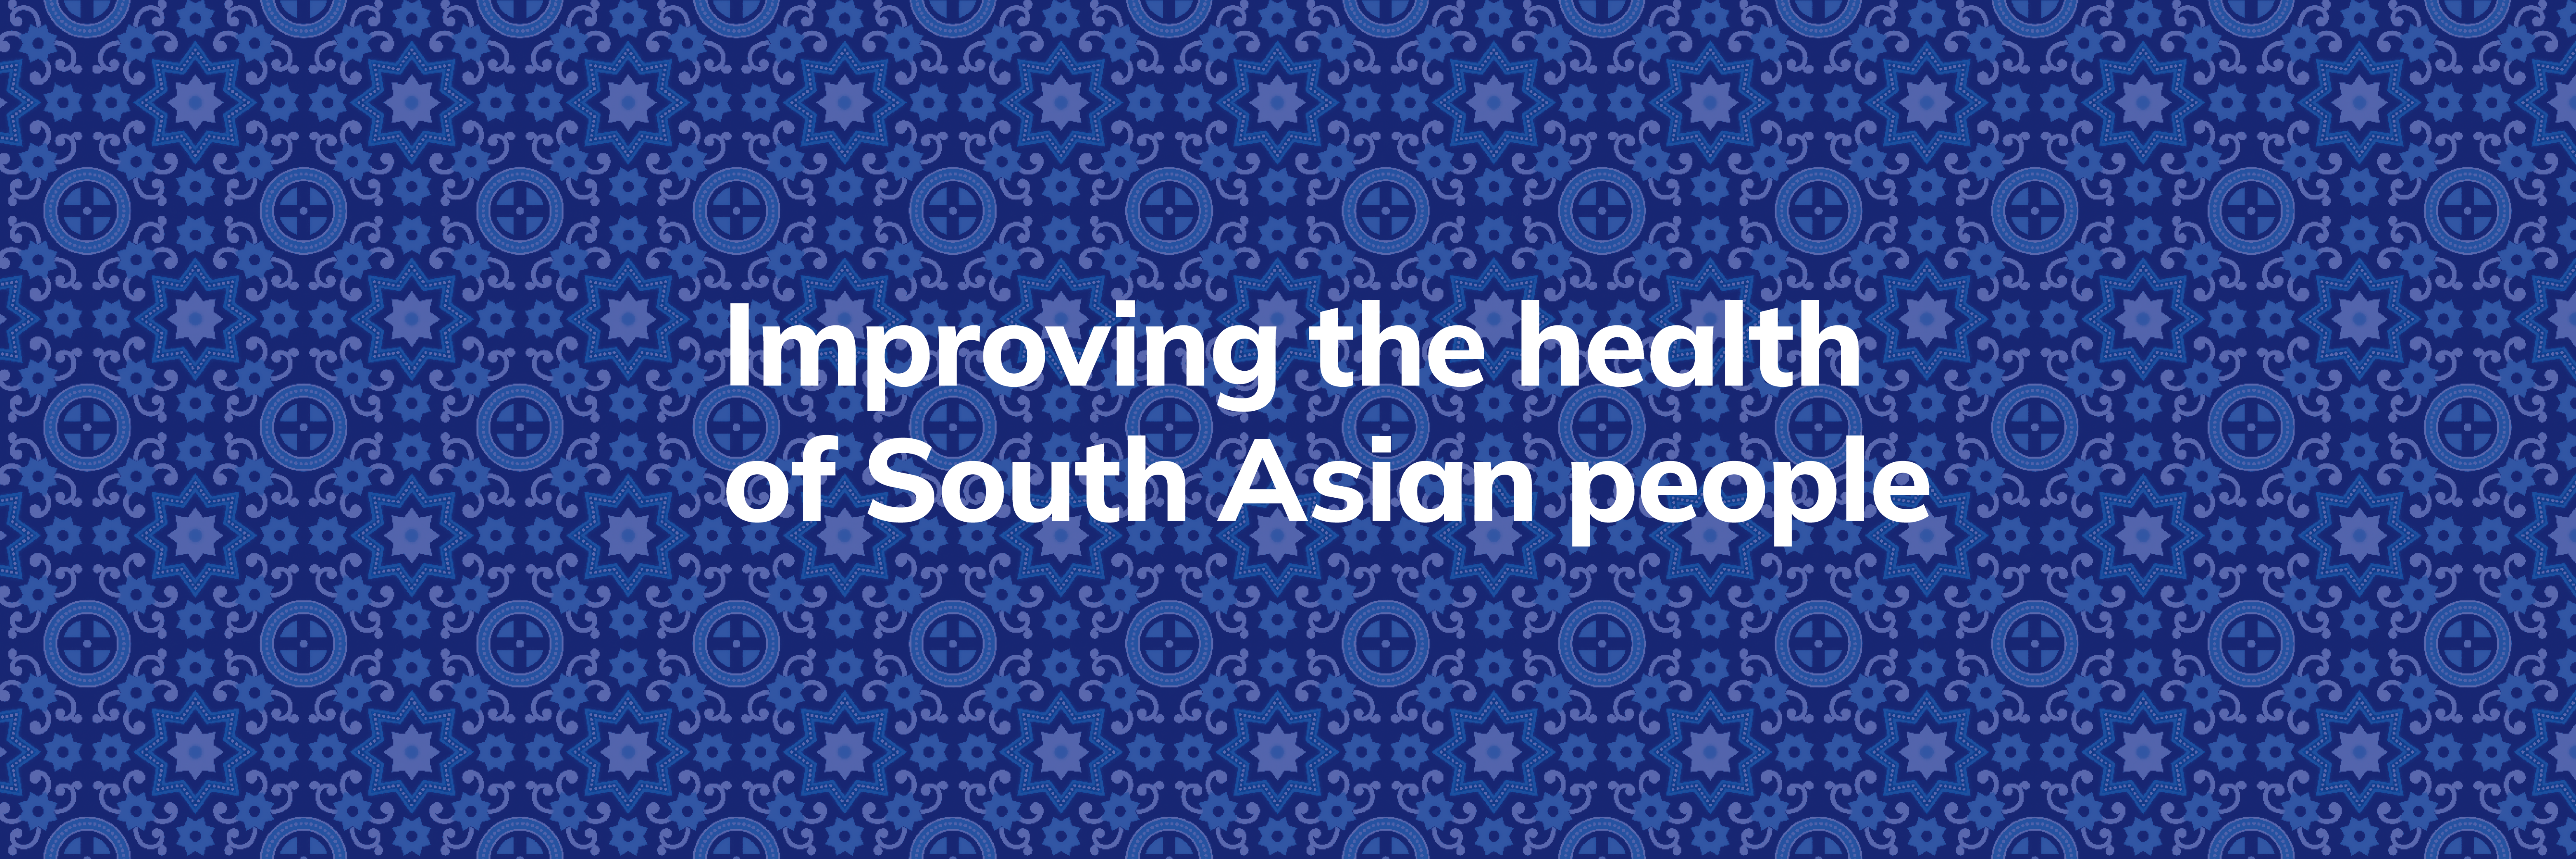 Improving the health of South Asian people